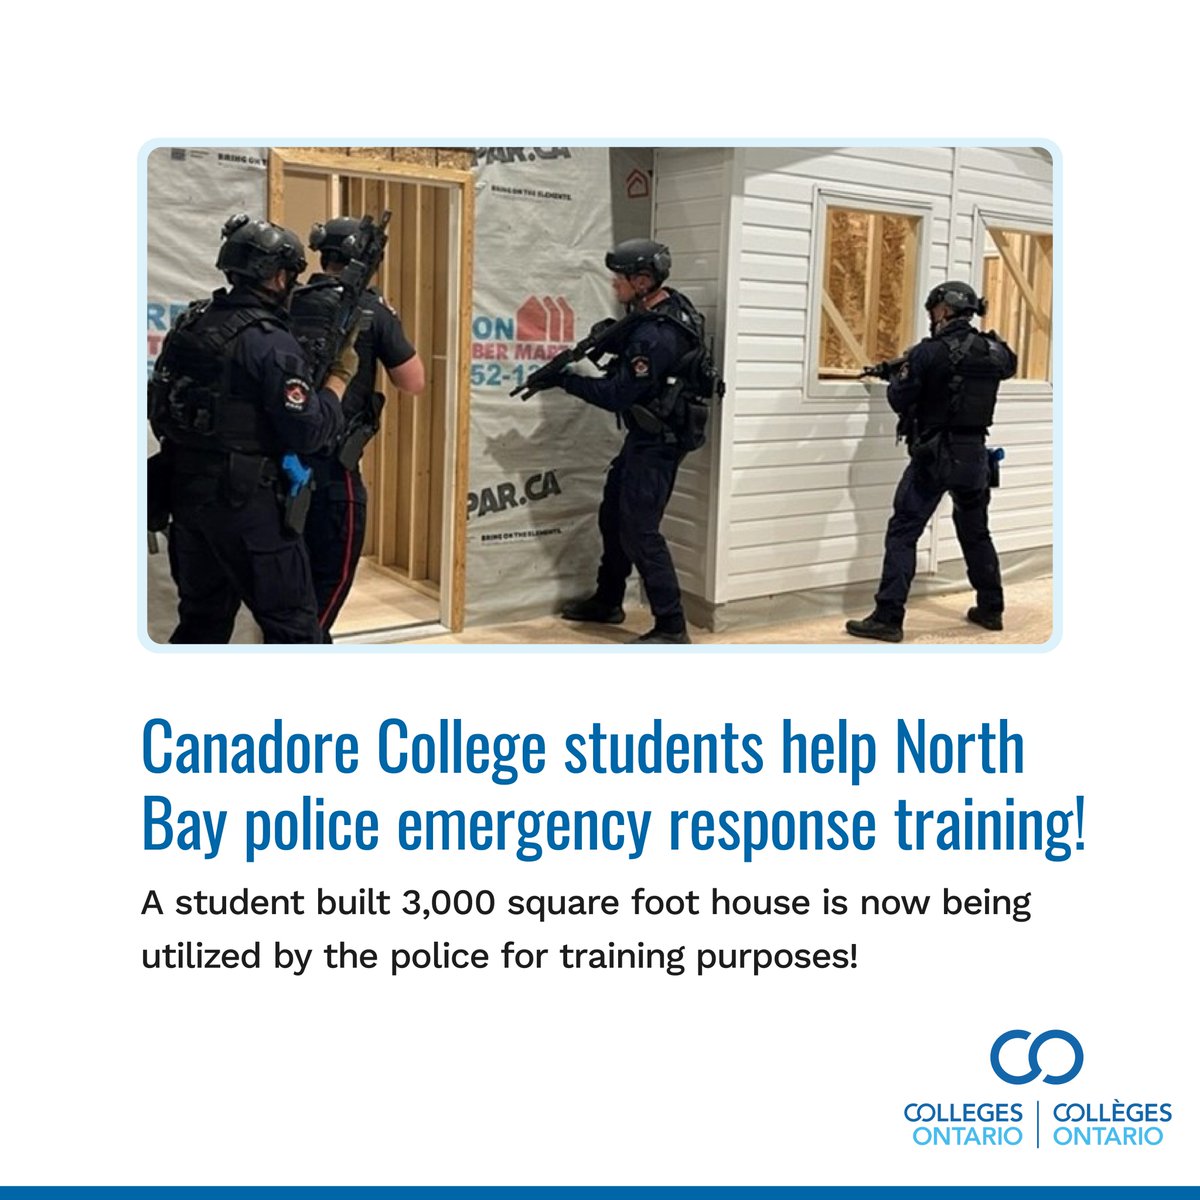 What an incredible partnership! A 3,000 square foot house - constructed by students as part of @CanadoreCollege's construction, carpentry and renovation programs - is now utilized by @NorthBayPolice for training purposes. Each year, students build a new structure for officers to